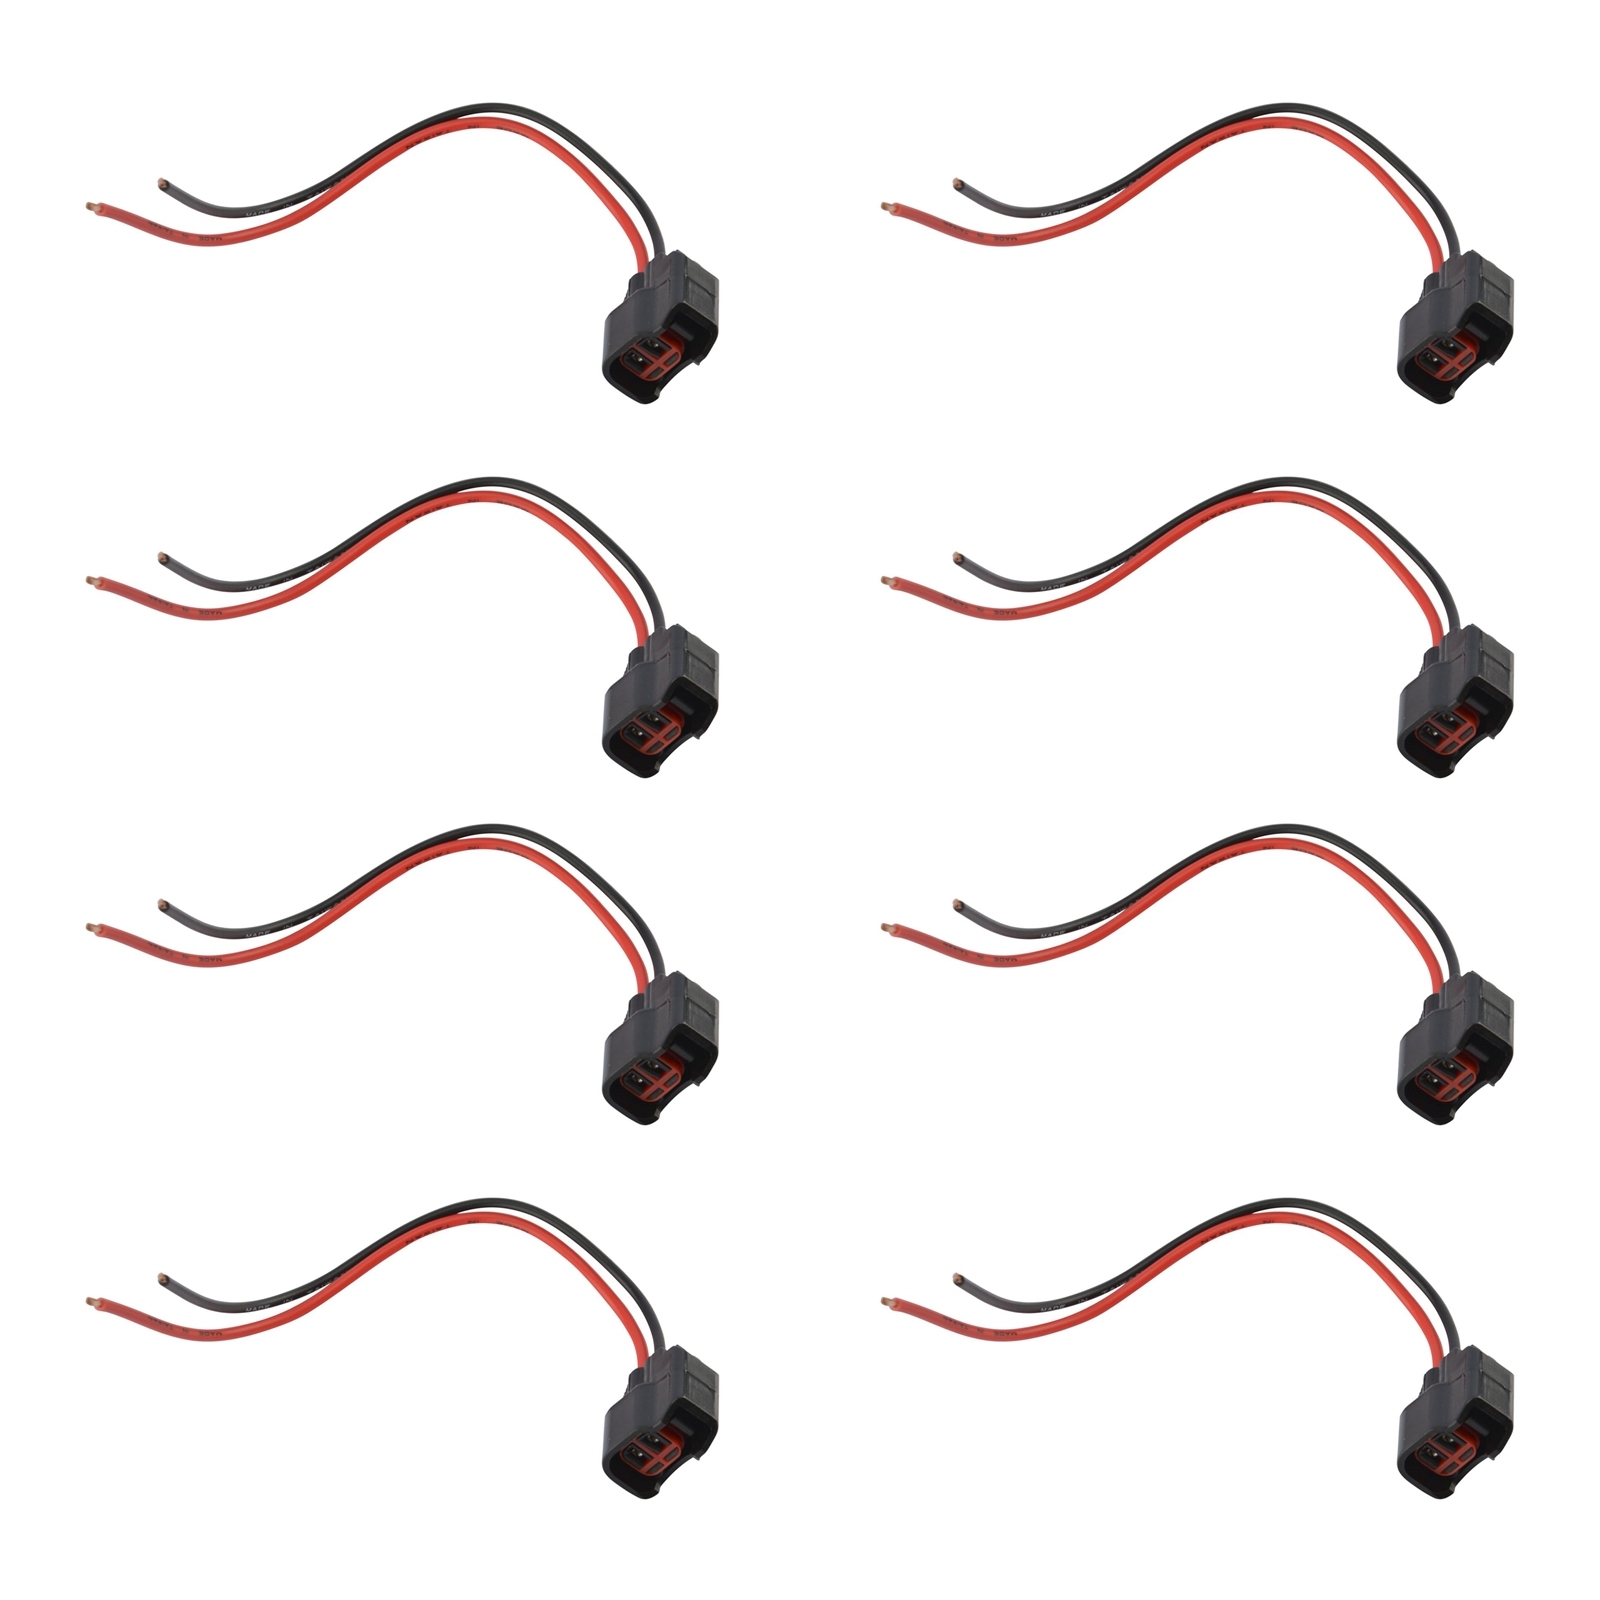 Diy Solutions Fuel Injector Harness 8 Piece Set For 99-05 Grand Cherokee, HWNV-FIC00057